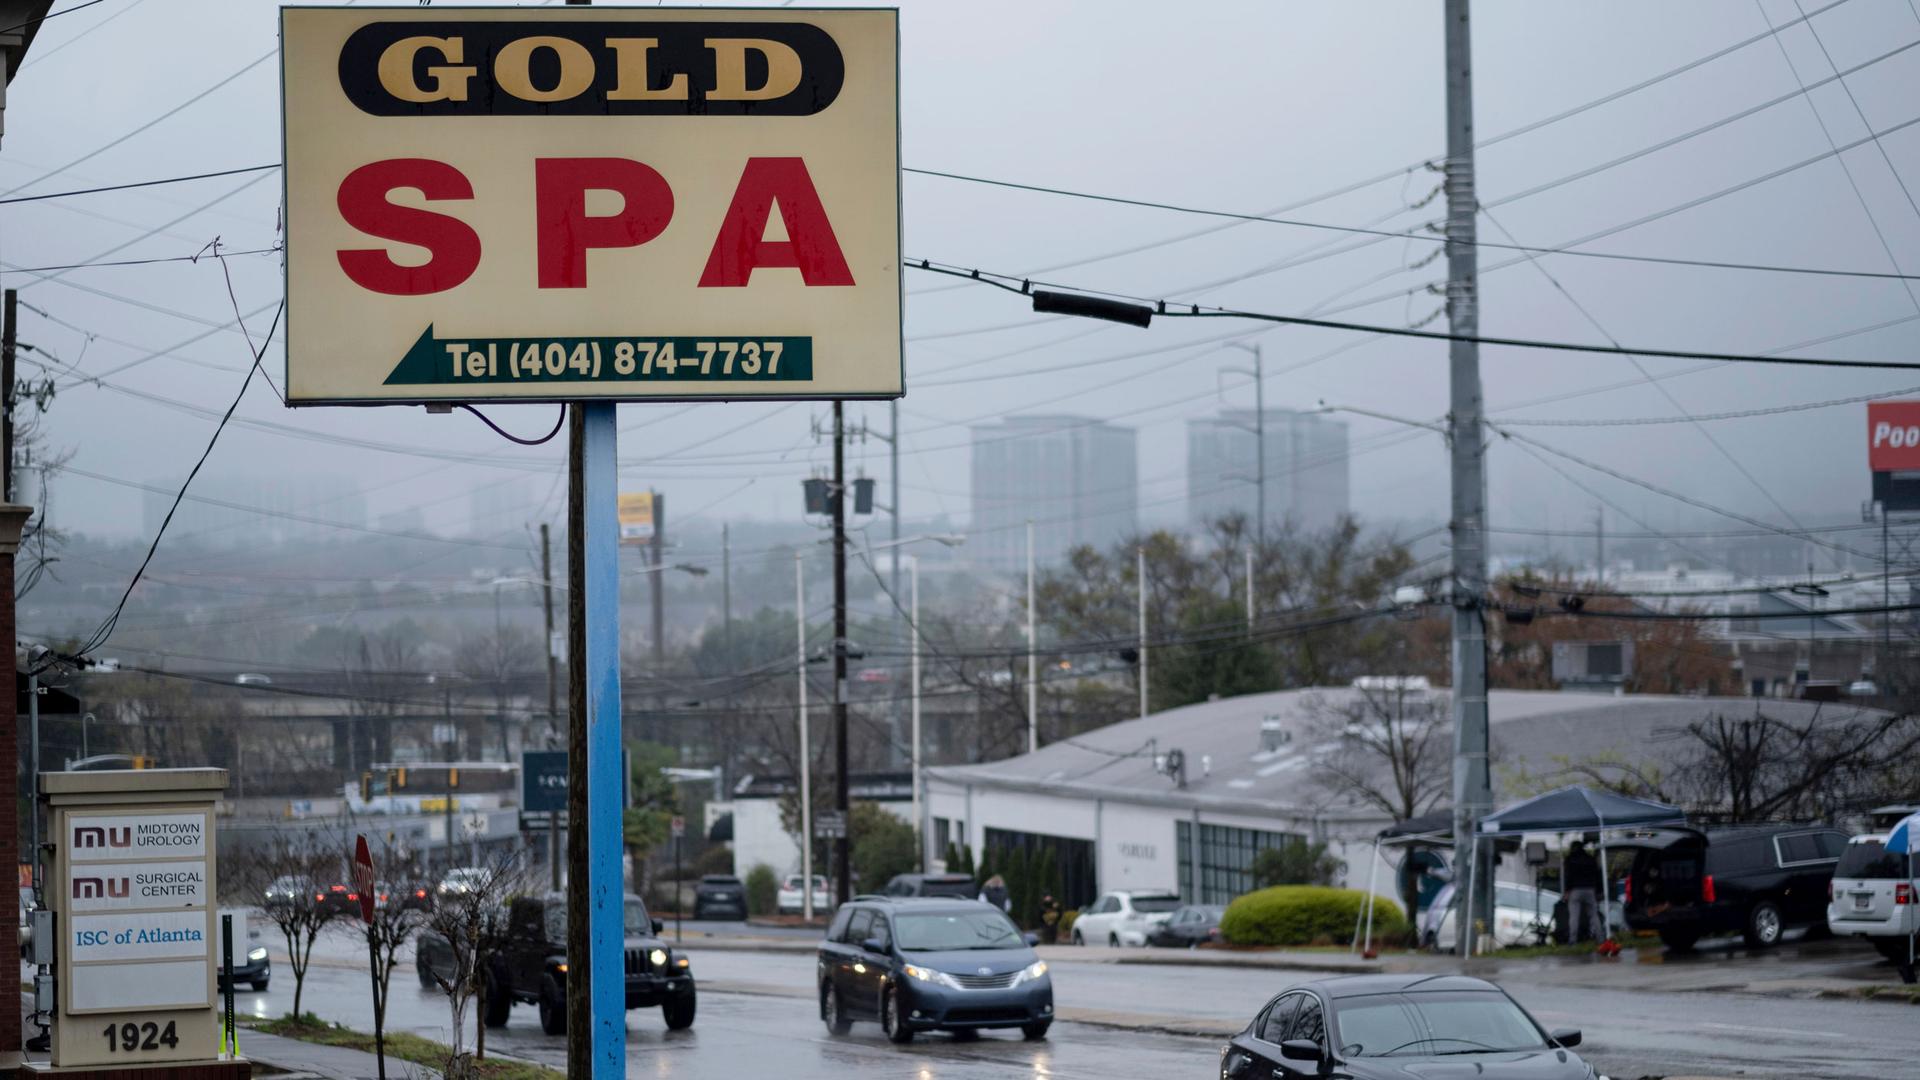 A sign above a roadway is shown for Gold Spa as cars pass by on a rainy afternoon.